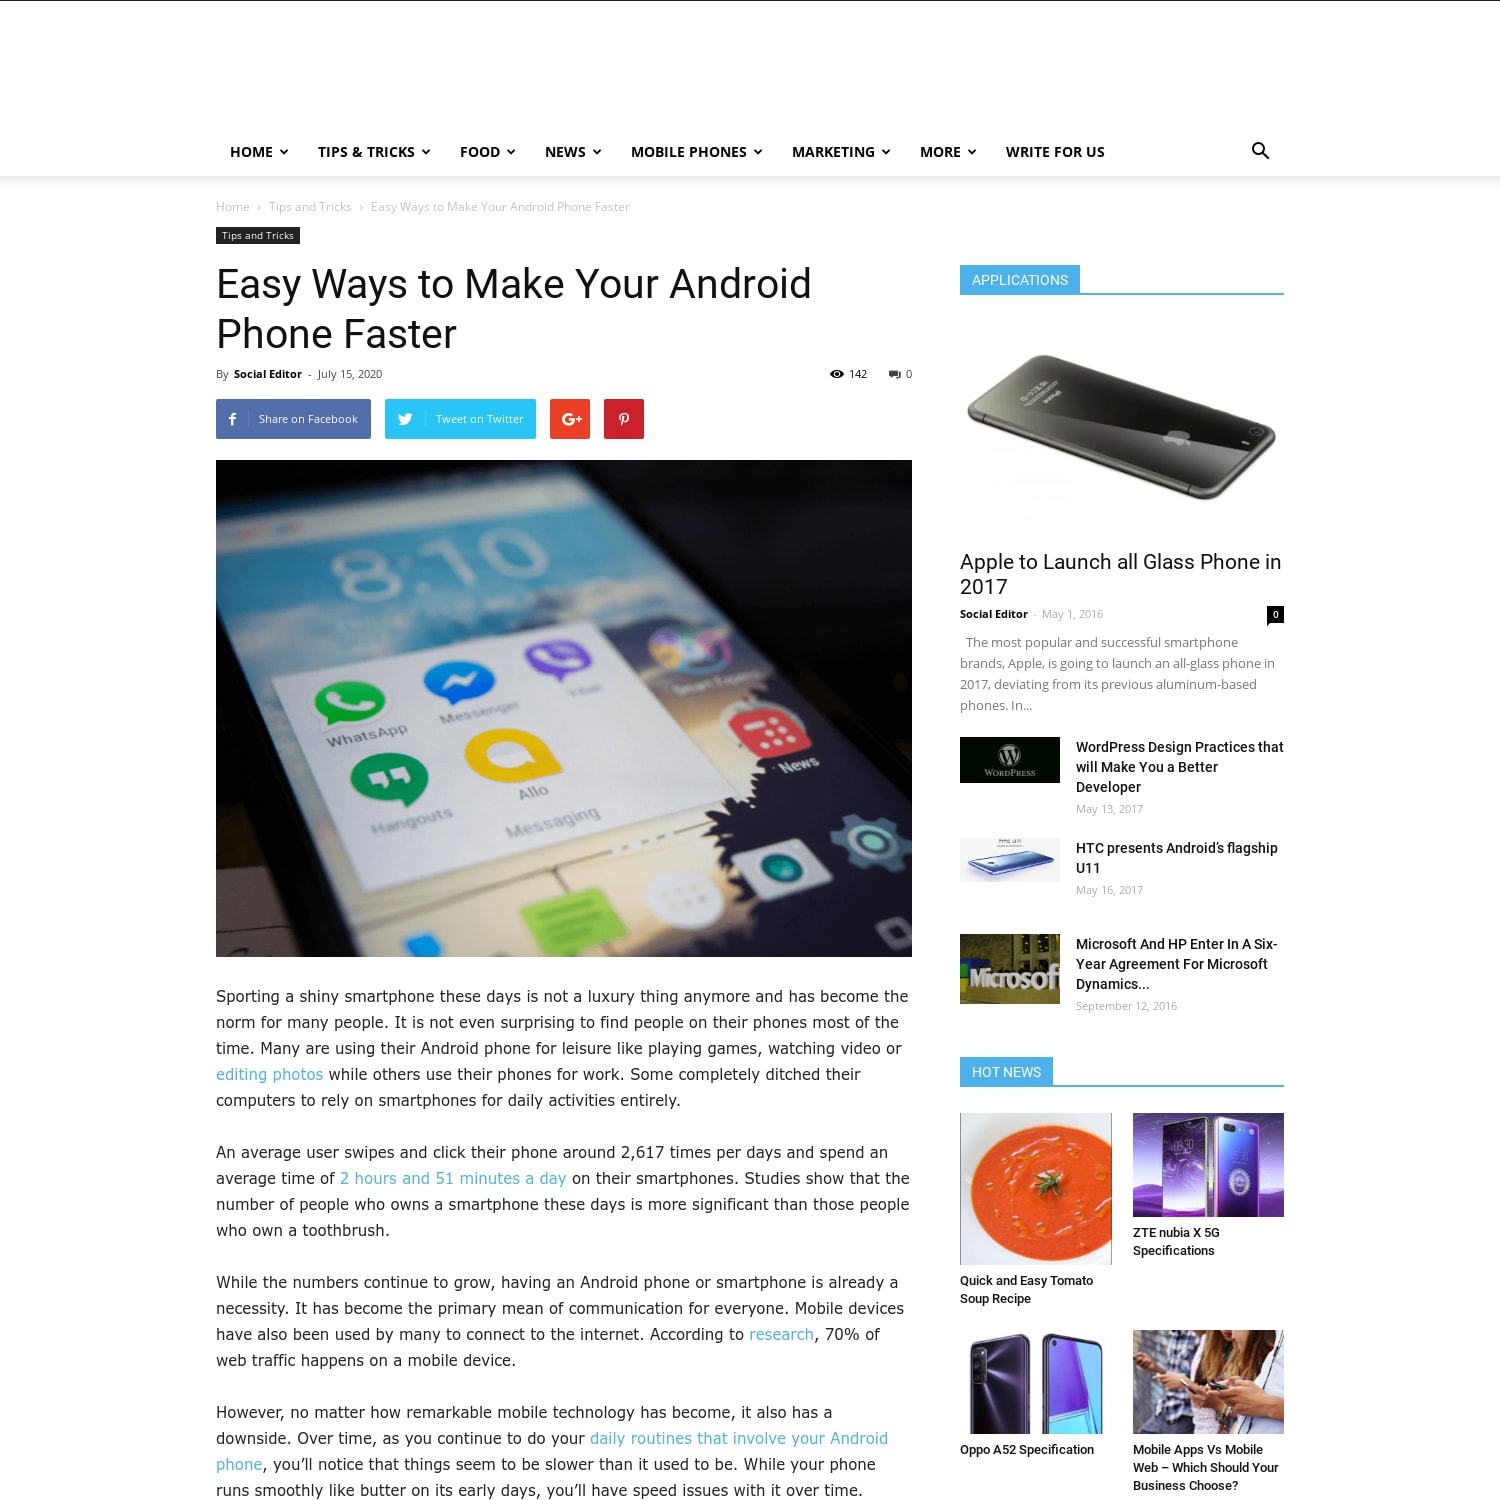 Easy Ways to Make Your Android Phone Faster